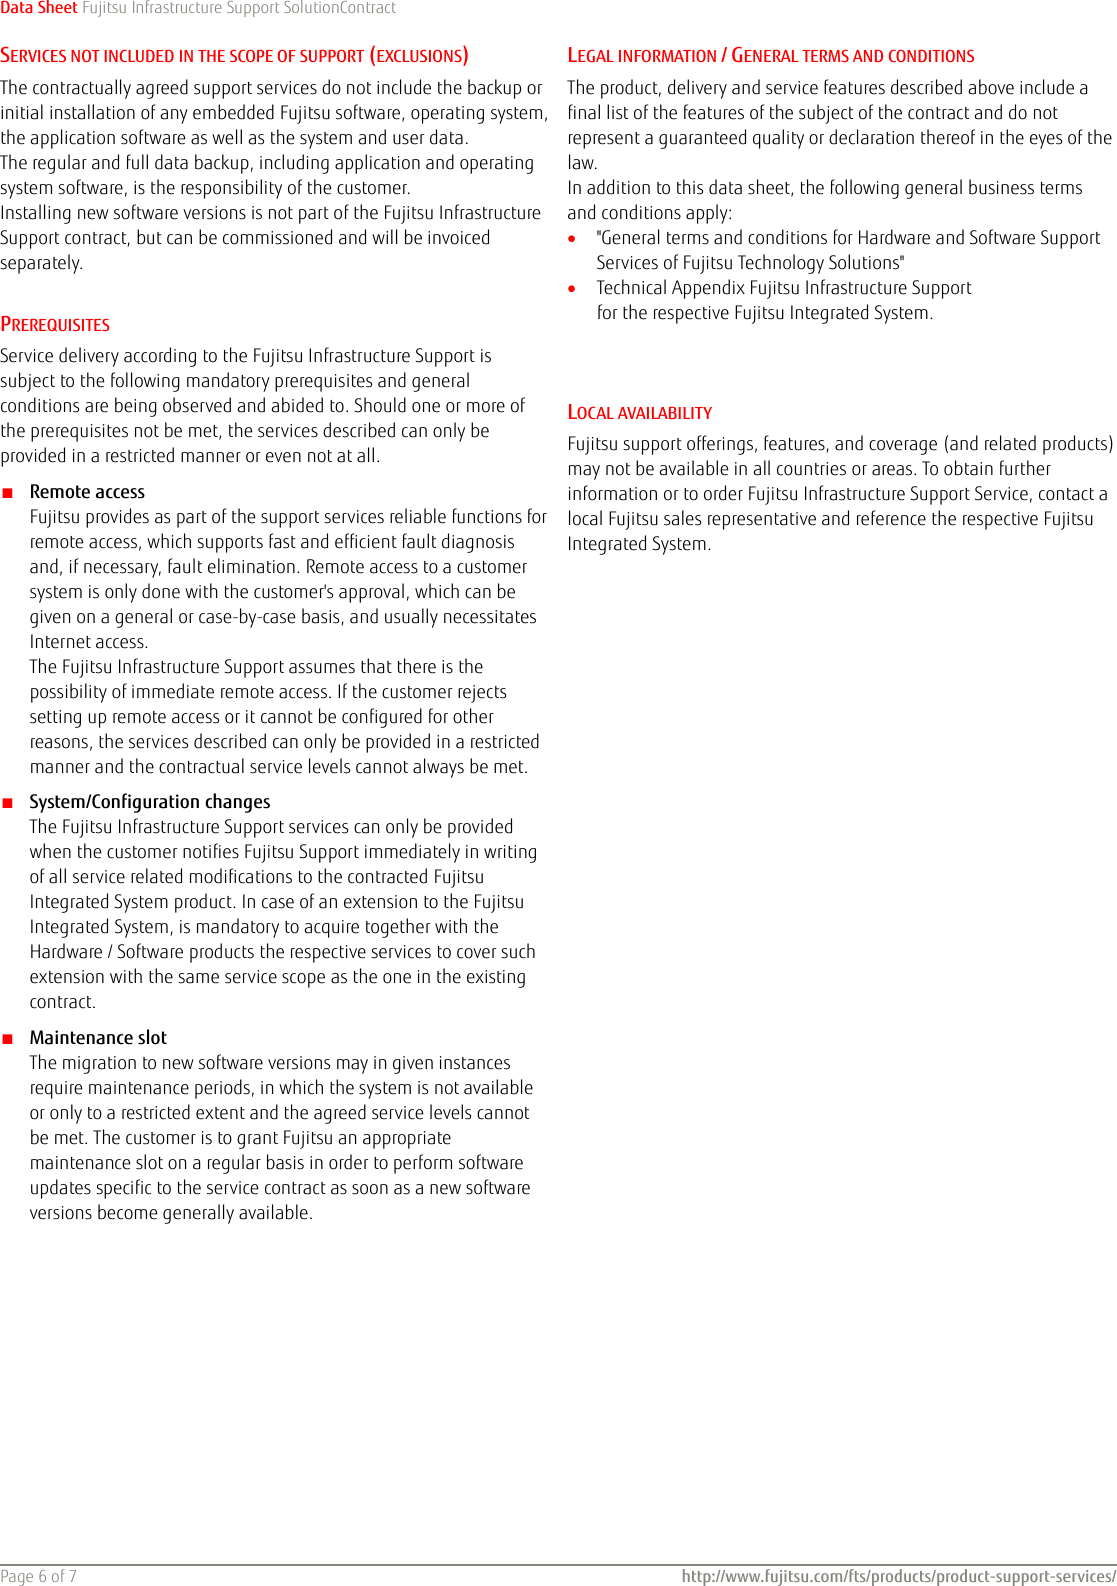 Page 6 of 7 - Data Sheet FUJITSU Infrastructure Support SolutionContract Solution Contract Ds-services-FIS-Solution Contract-en